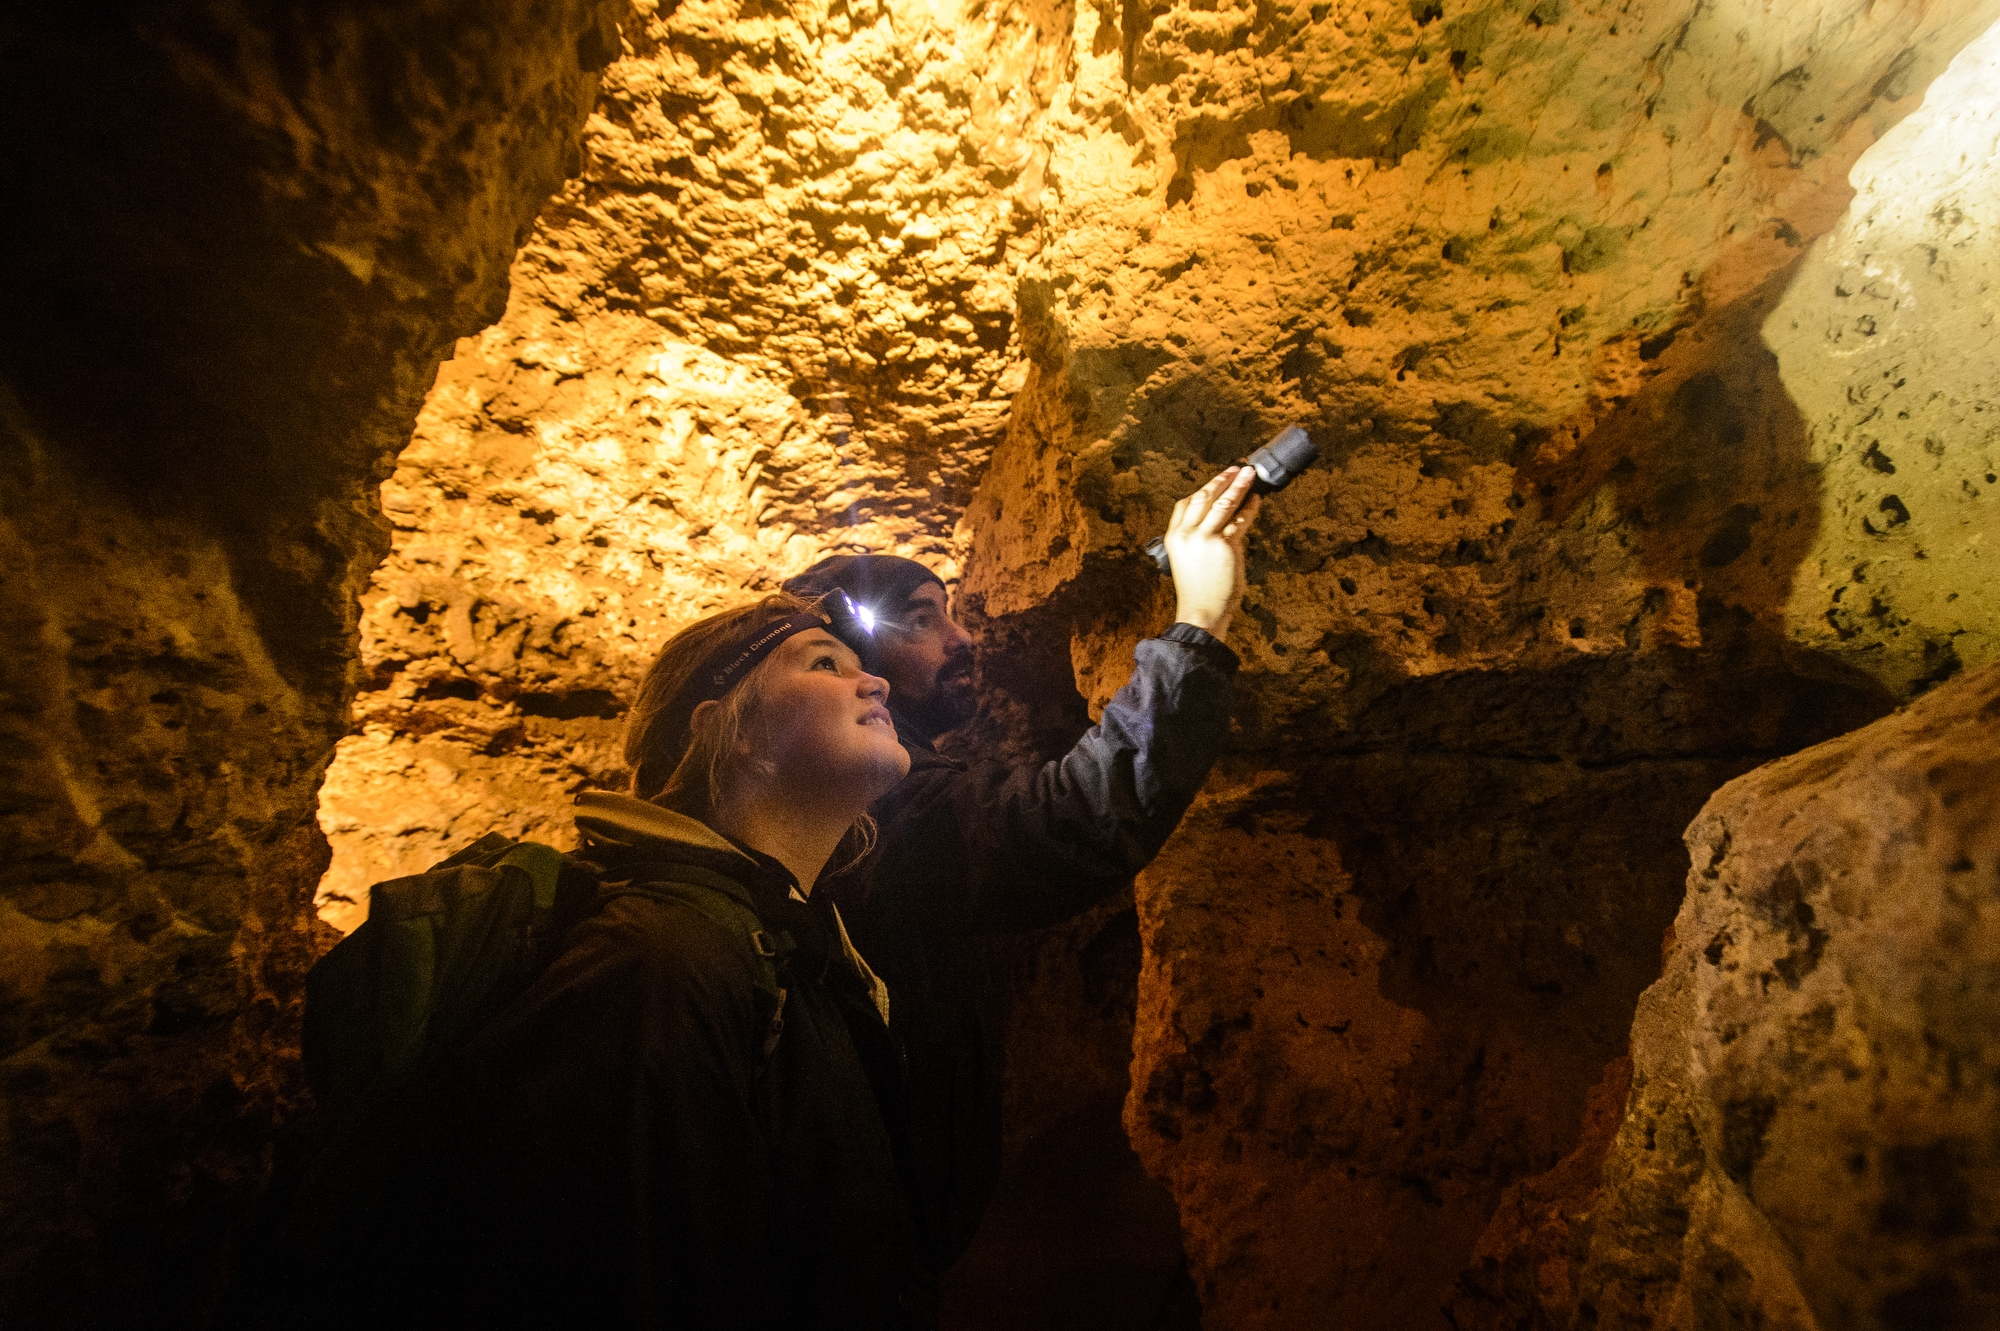 Stalagmite from Cave of the Mounds shows evidence of sudden warming during last ice age